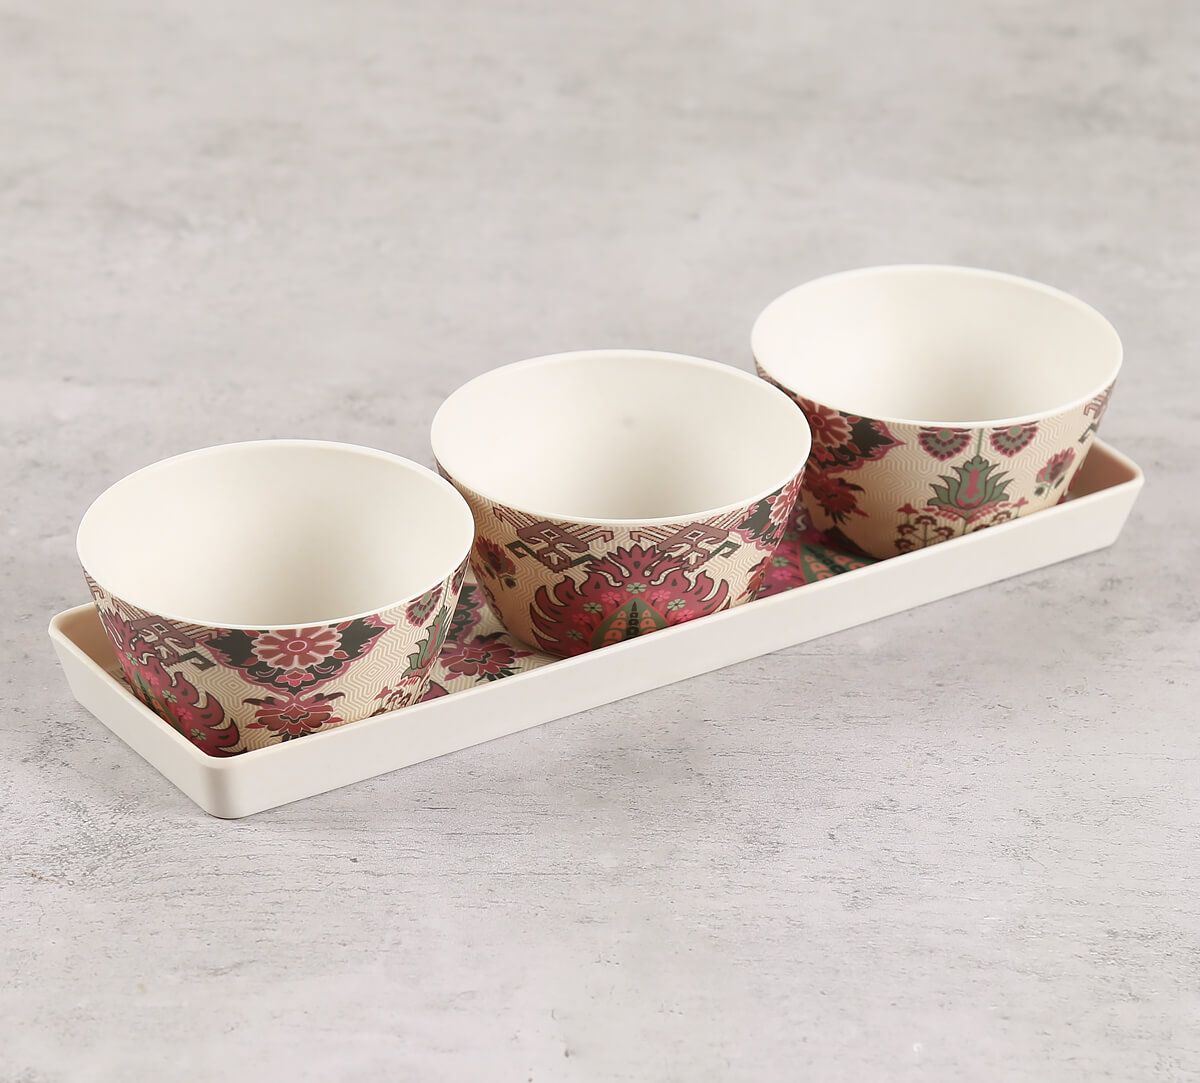 India Circus by Krsnaa Mehta Mystifying Dazzle Bowls and Tray Set